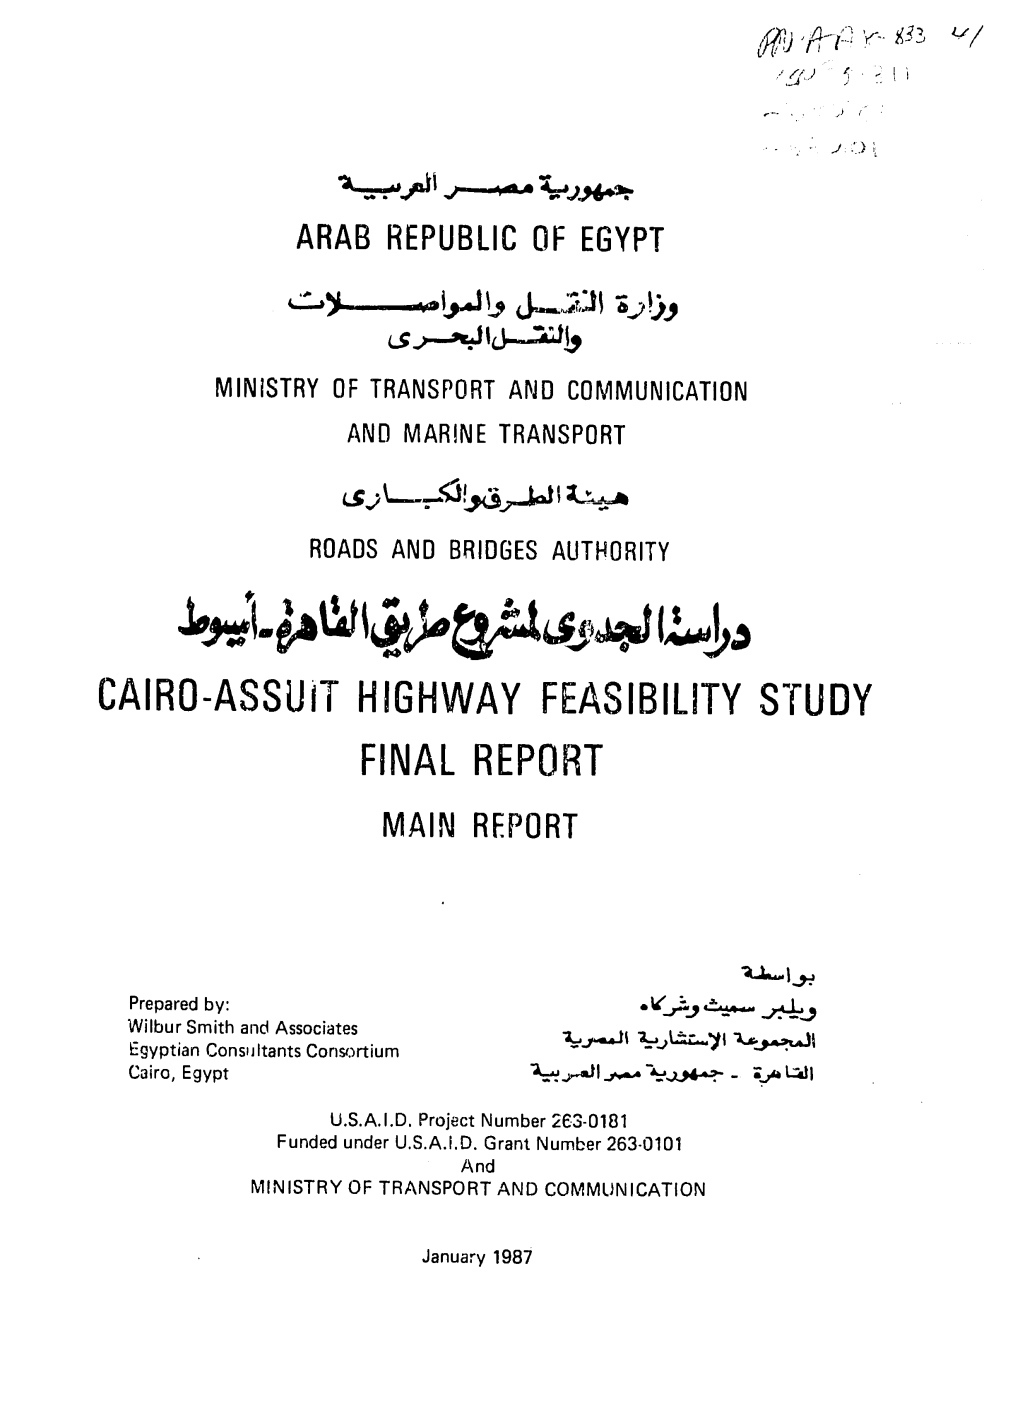 CAIRO-Assuit HIGHWAY FEASIBILITY STUDY FINAL REPORT MAIN REPORT